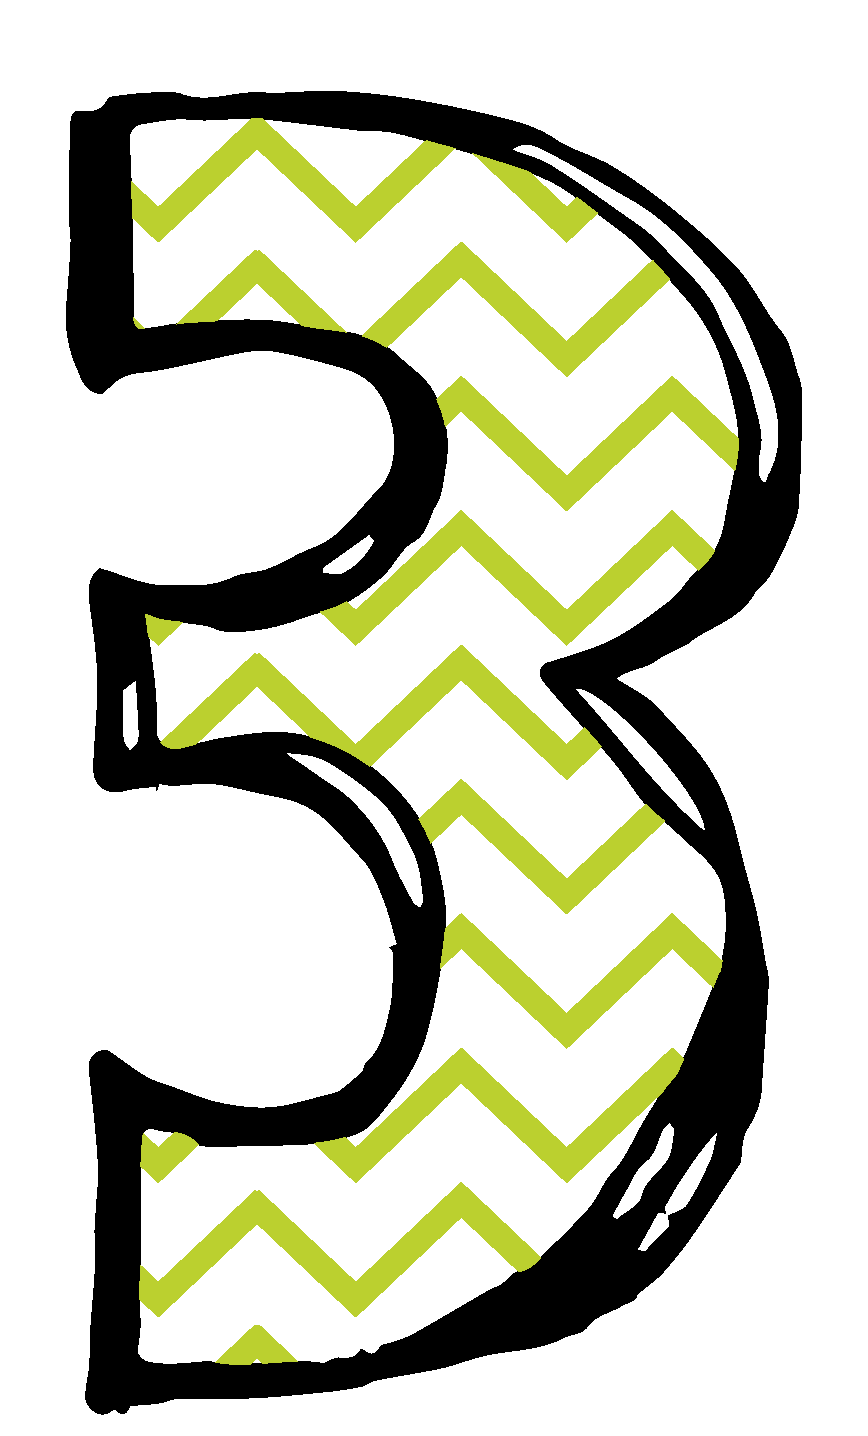  numeros pinterest board. Number 2 clipart number chevron 1